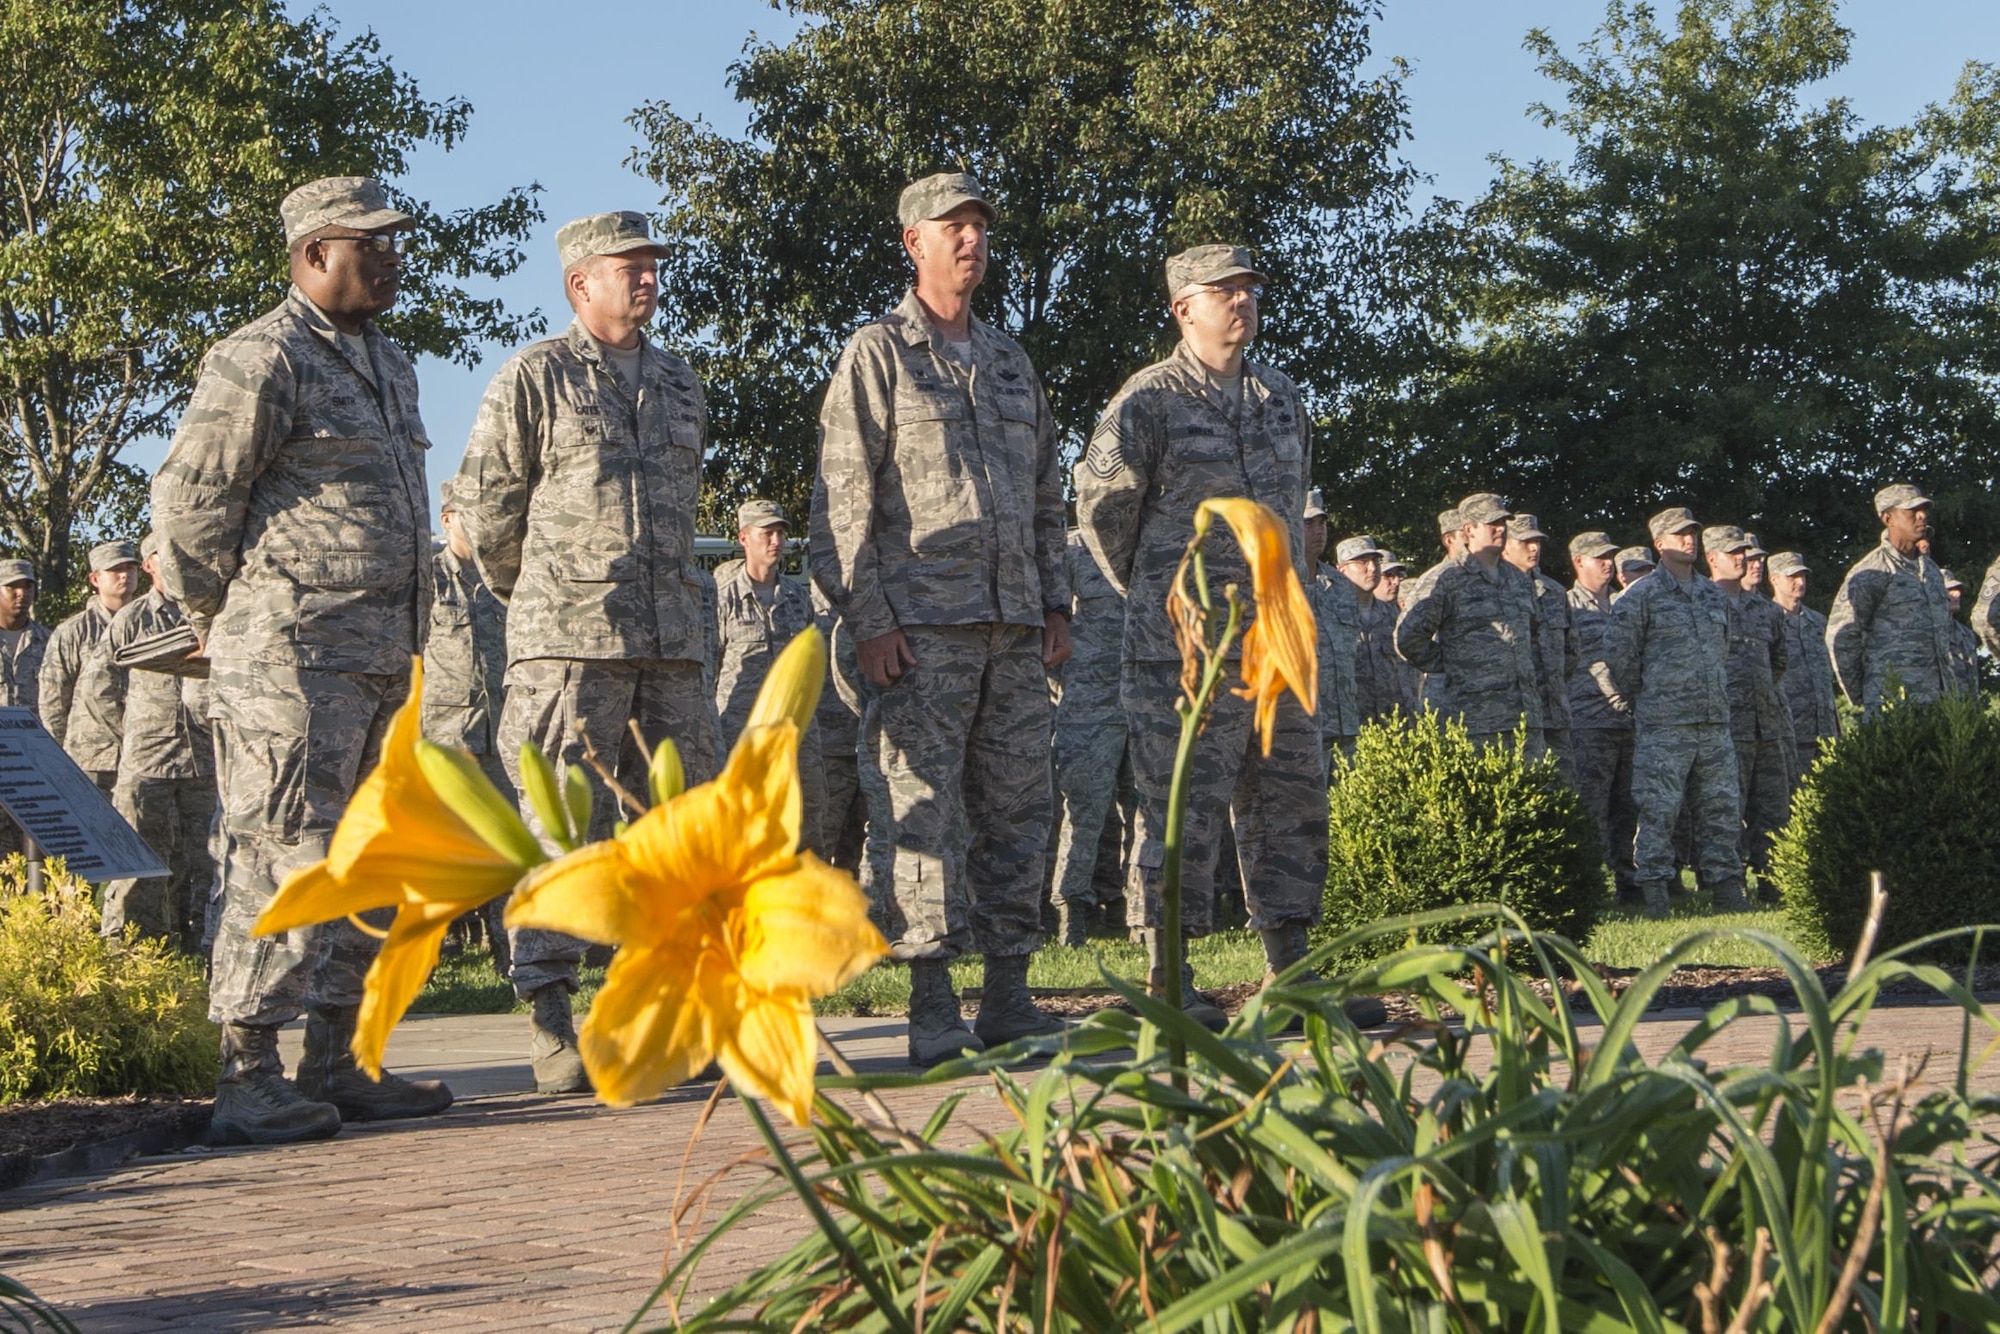 From left to right, Chap. (Lt. Col.) Obadiah Smith Jr., 434th Air Refueling Wing chaplain, Col. Paul Gates, 434th ARW vice commander, Col. Larry Shaw, 434th ARW commander, and Chief Master Sgt. Wes Marion, 434th ARW command chief, stand in formation during a 9/11 remembrance ceremony at Grissom Air Reserve Base, Ind., Sept. 11, 2016. During the event more than 500 Grissom Airmen, firefighters and civilians joined Americans around the world share a moment of silence to remember the victims and pay their respects. (U.S. Air Force photo/Tech. Sgt. Benjamin Mota)